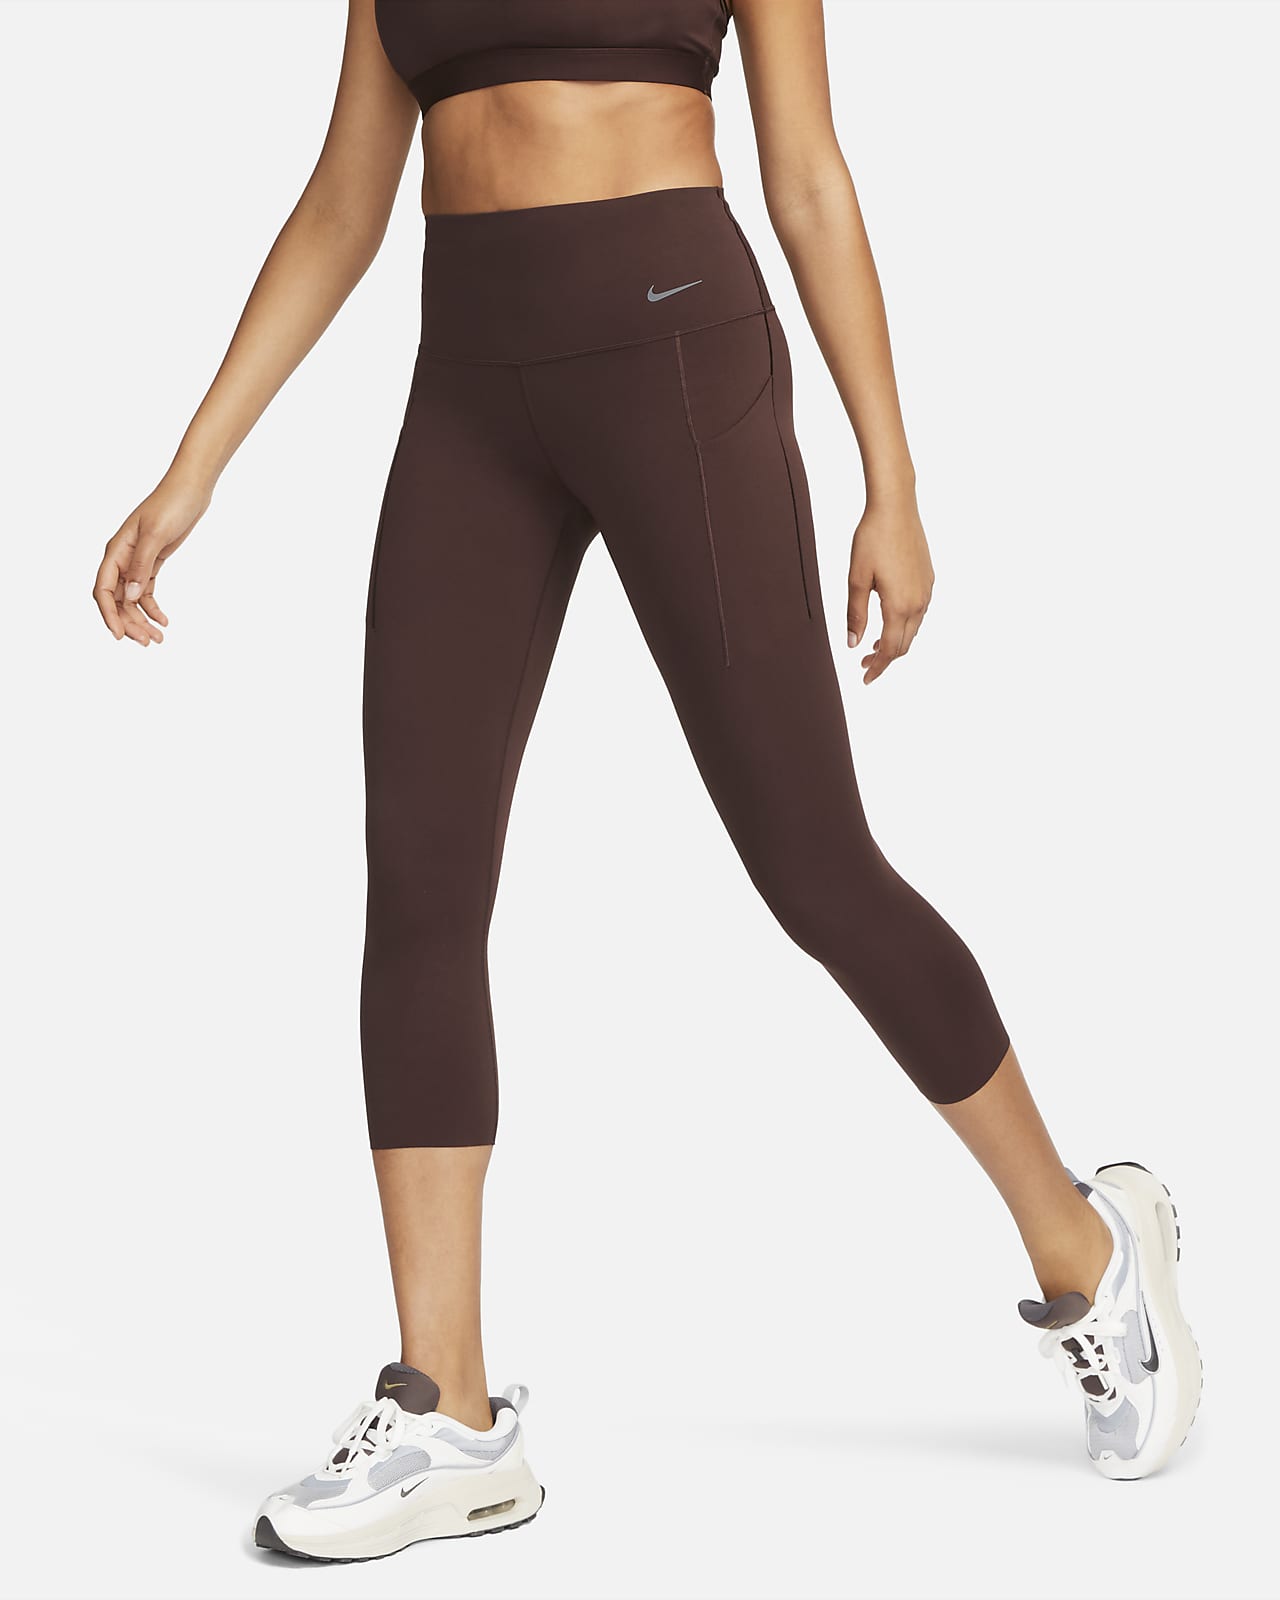 Nike Universa Women's Medium-Support High-Waisted Cropped Leggings with Nike.com